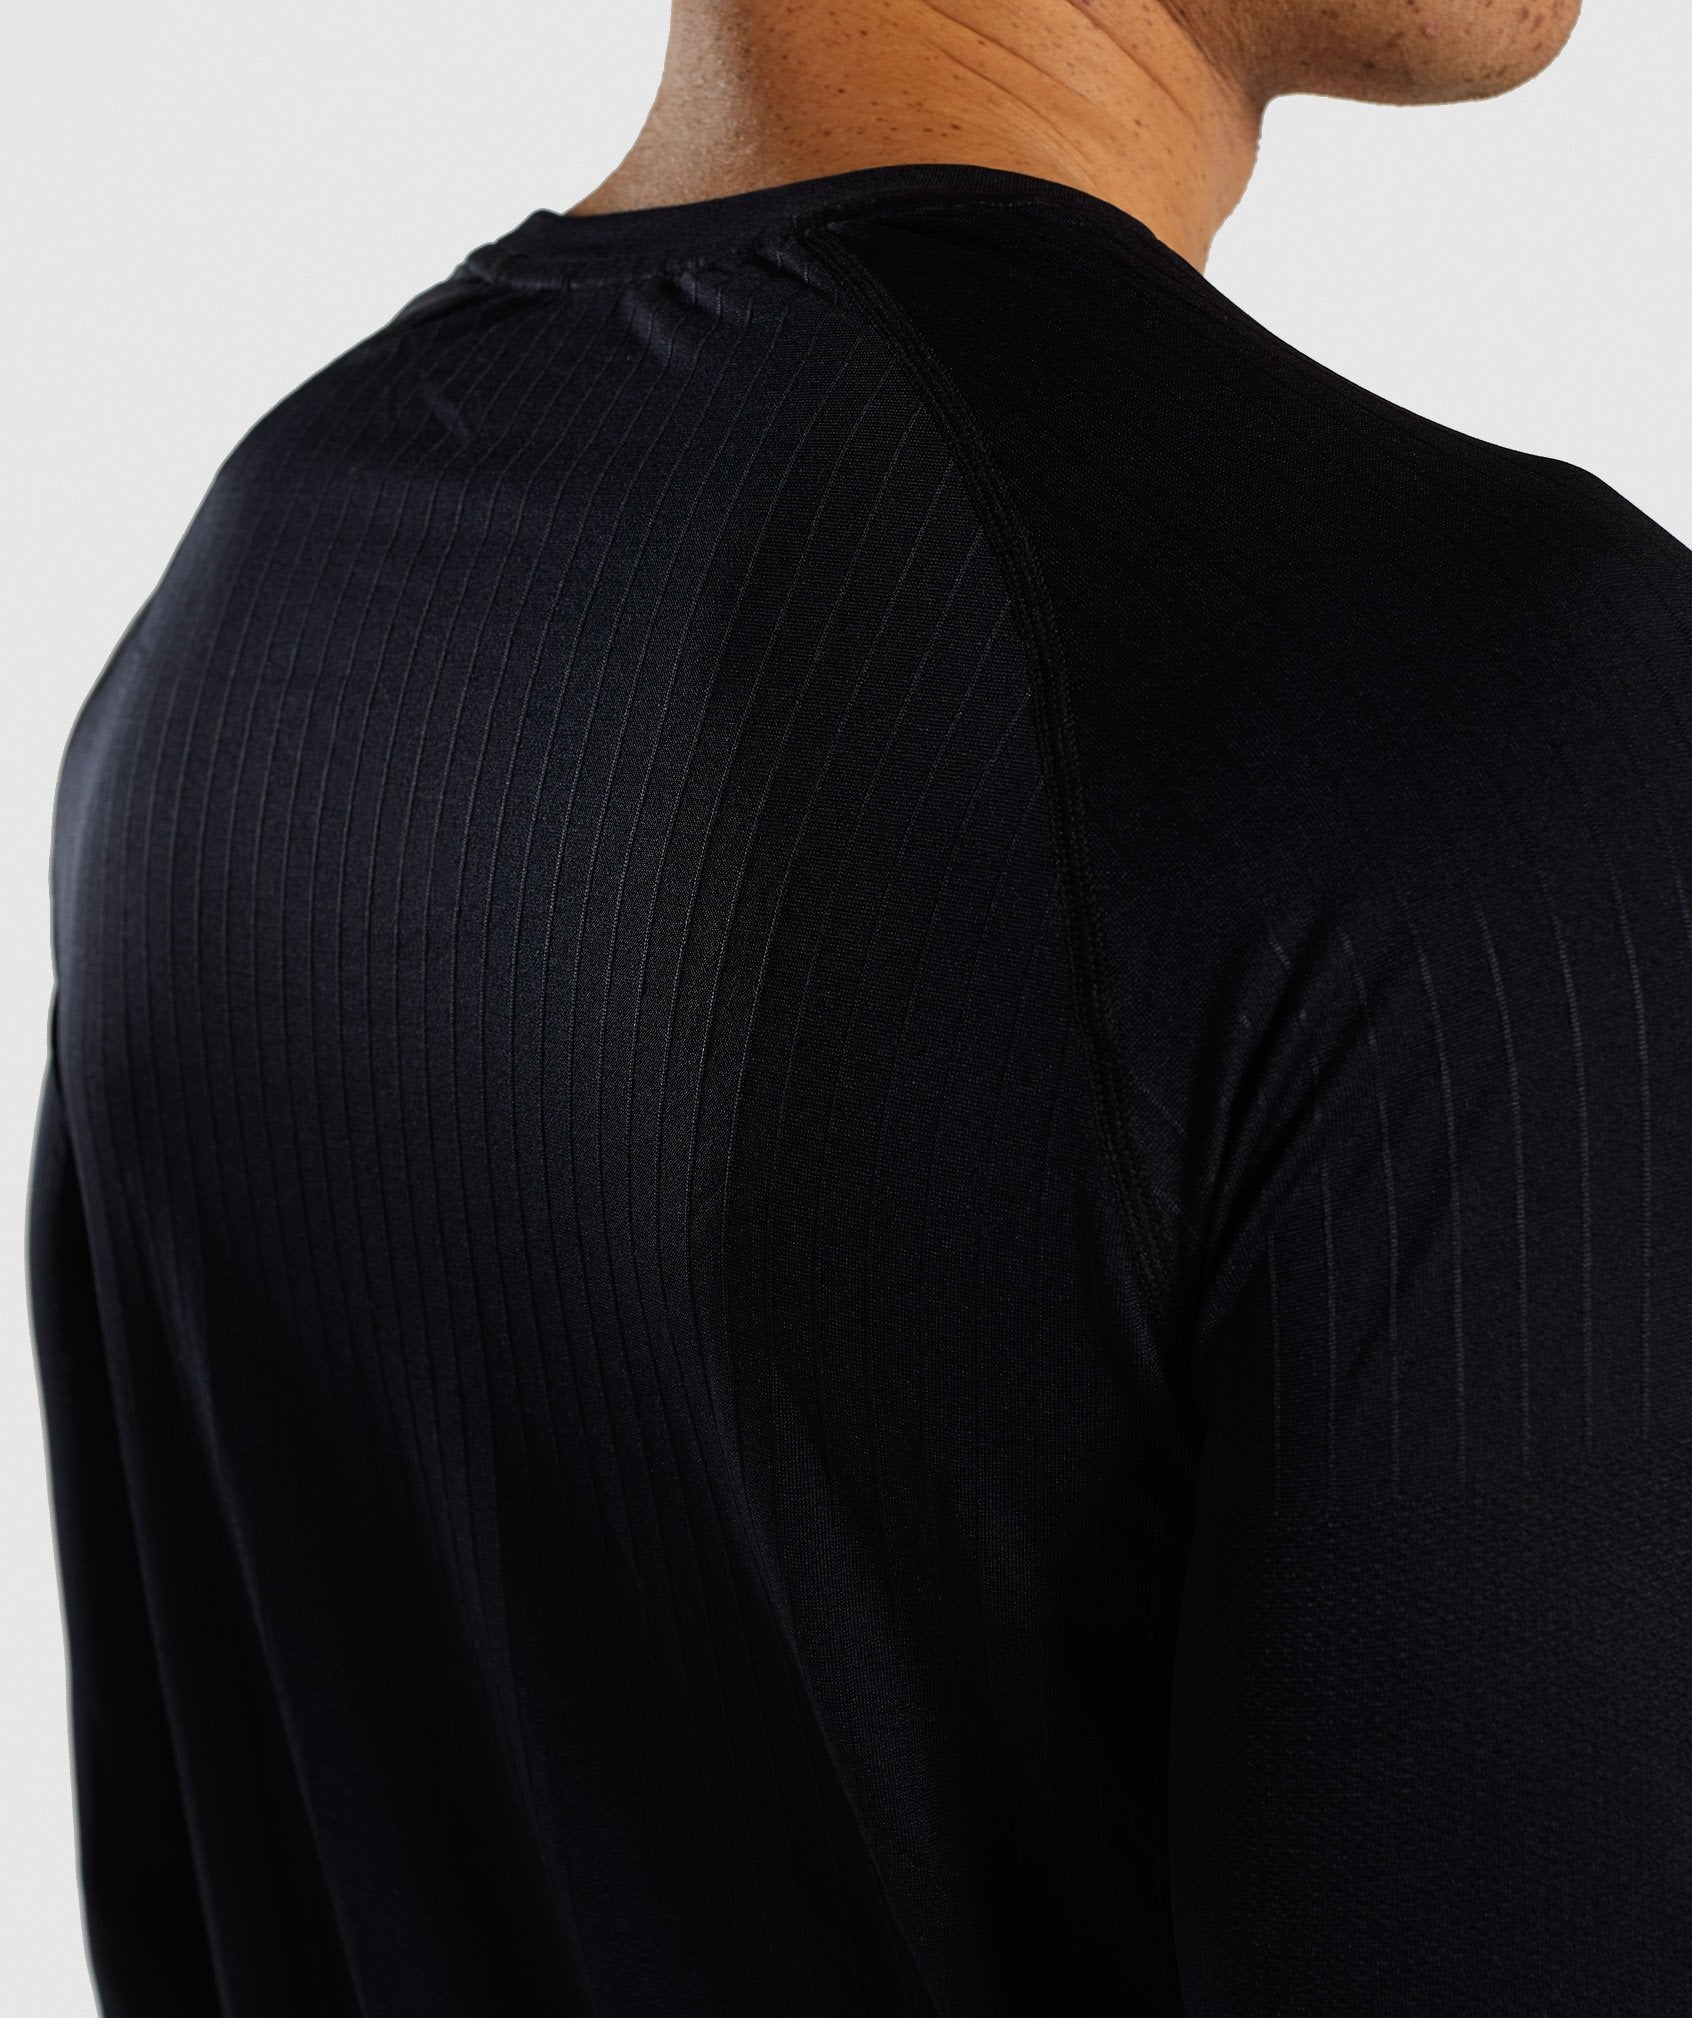 Superior Lightweight Seamless Long Sleeve T-Shirt in Black - view 5